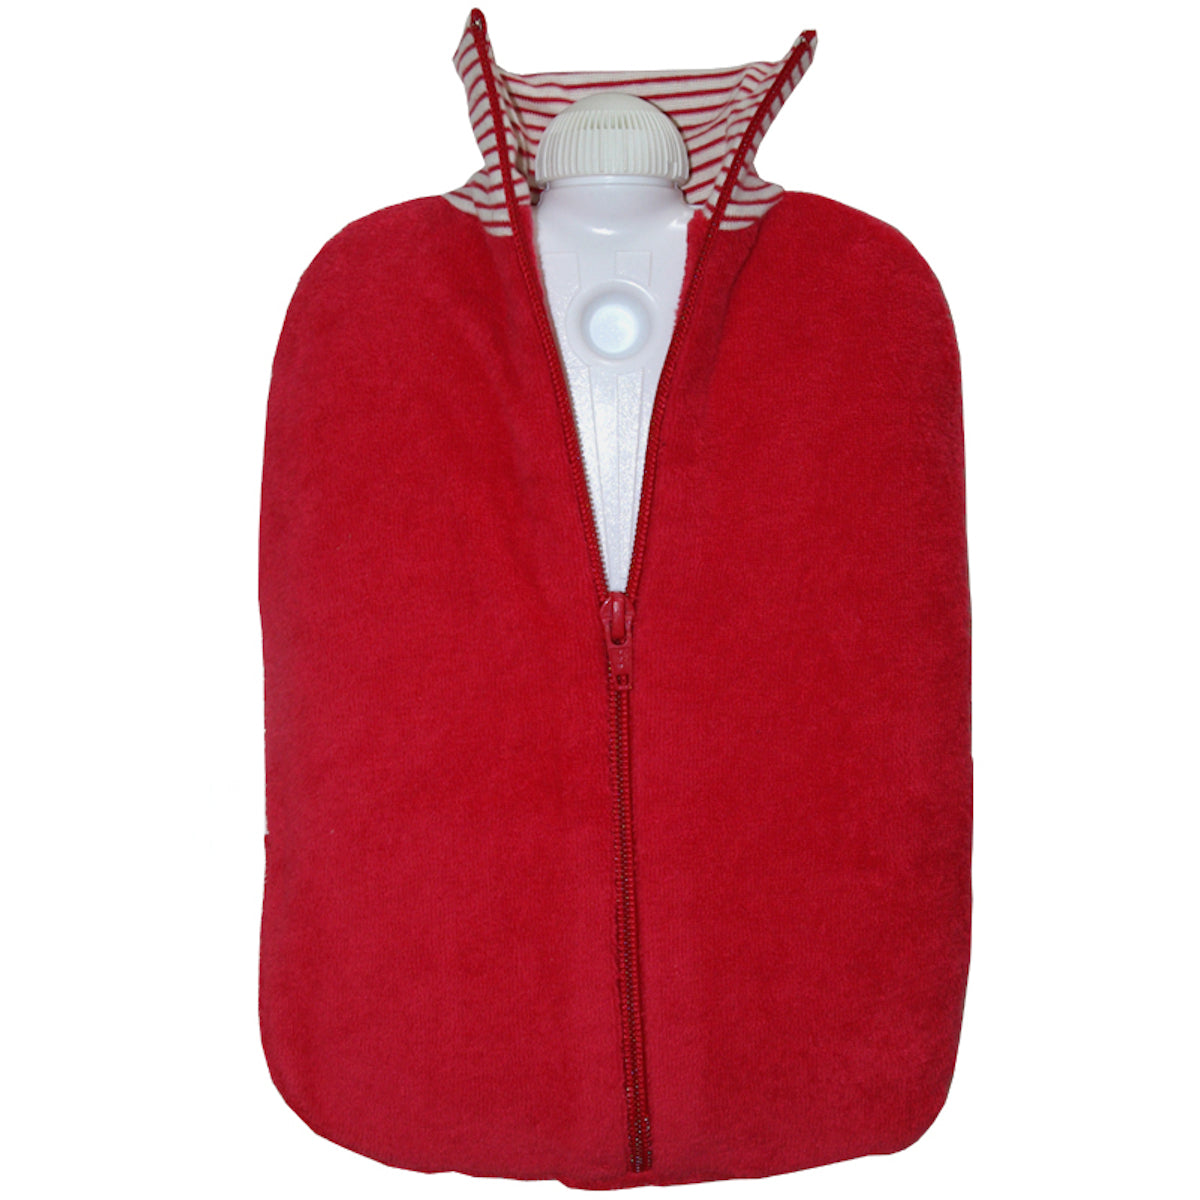 Eco Hot Water Bottle - Organic Cotton Cover - Cherry